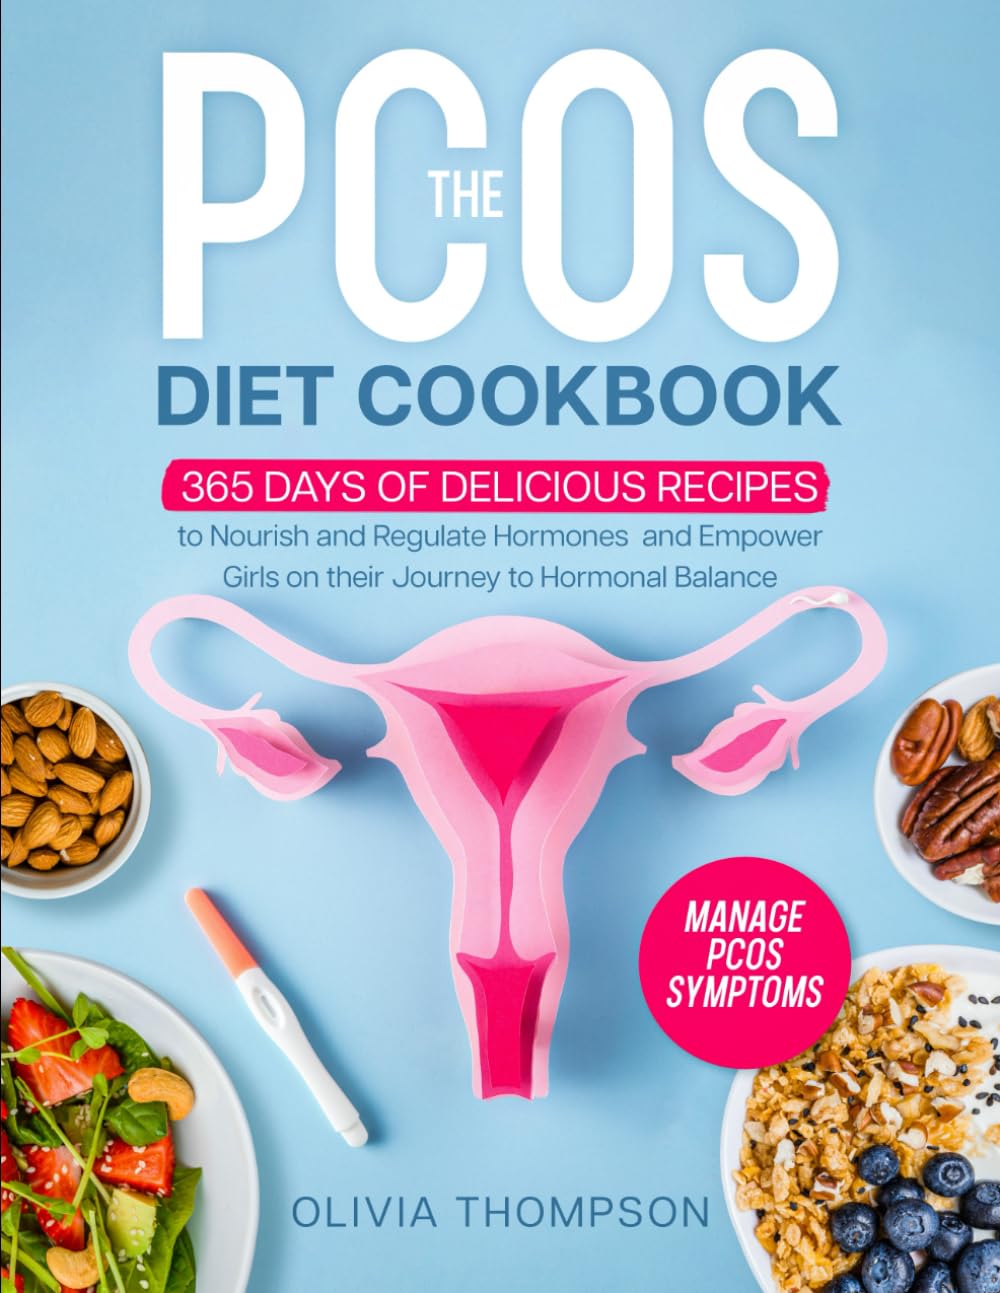 The PCOS Diet Cookbook: 365 Days of Delicious Recipes to Nourish and Regulate Hormones, Manage PCOS Symptoms, and Empower Girls on their Journey to Hormonal Balance